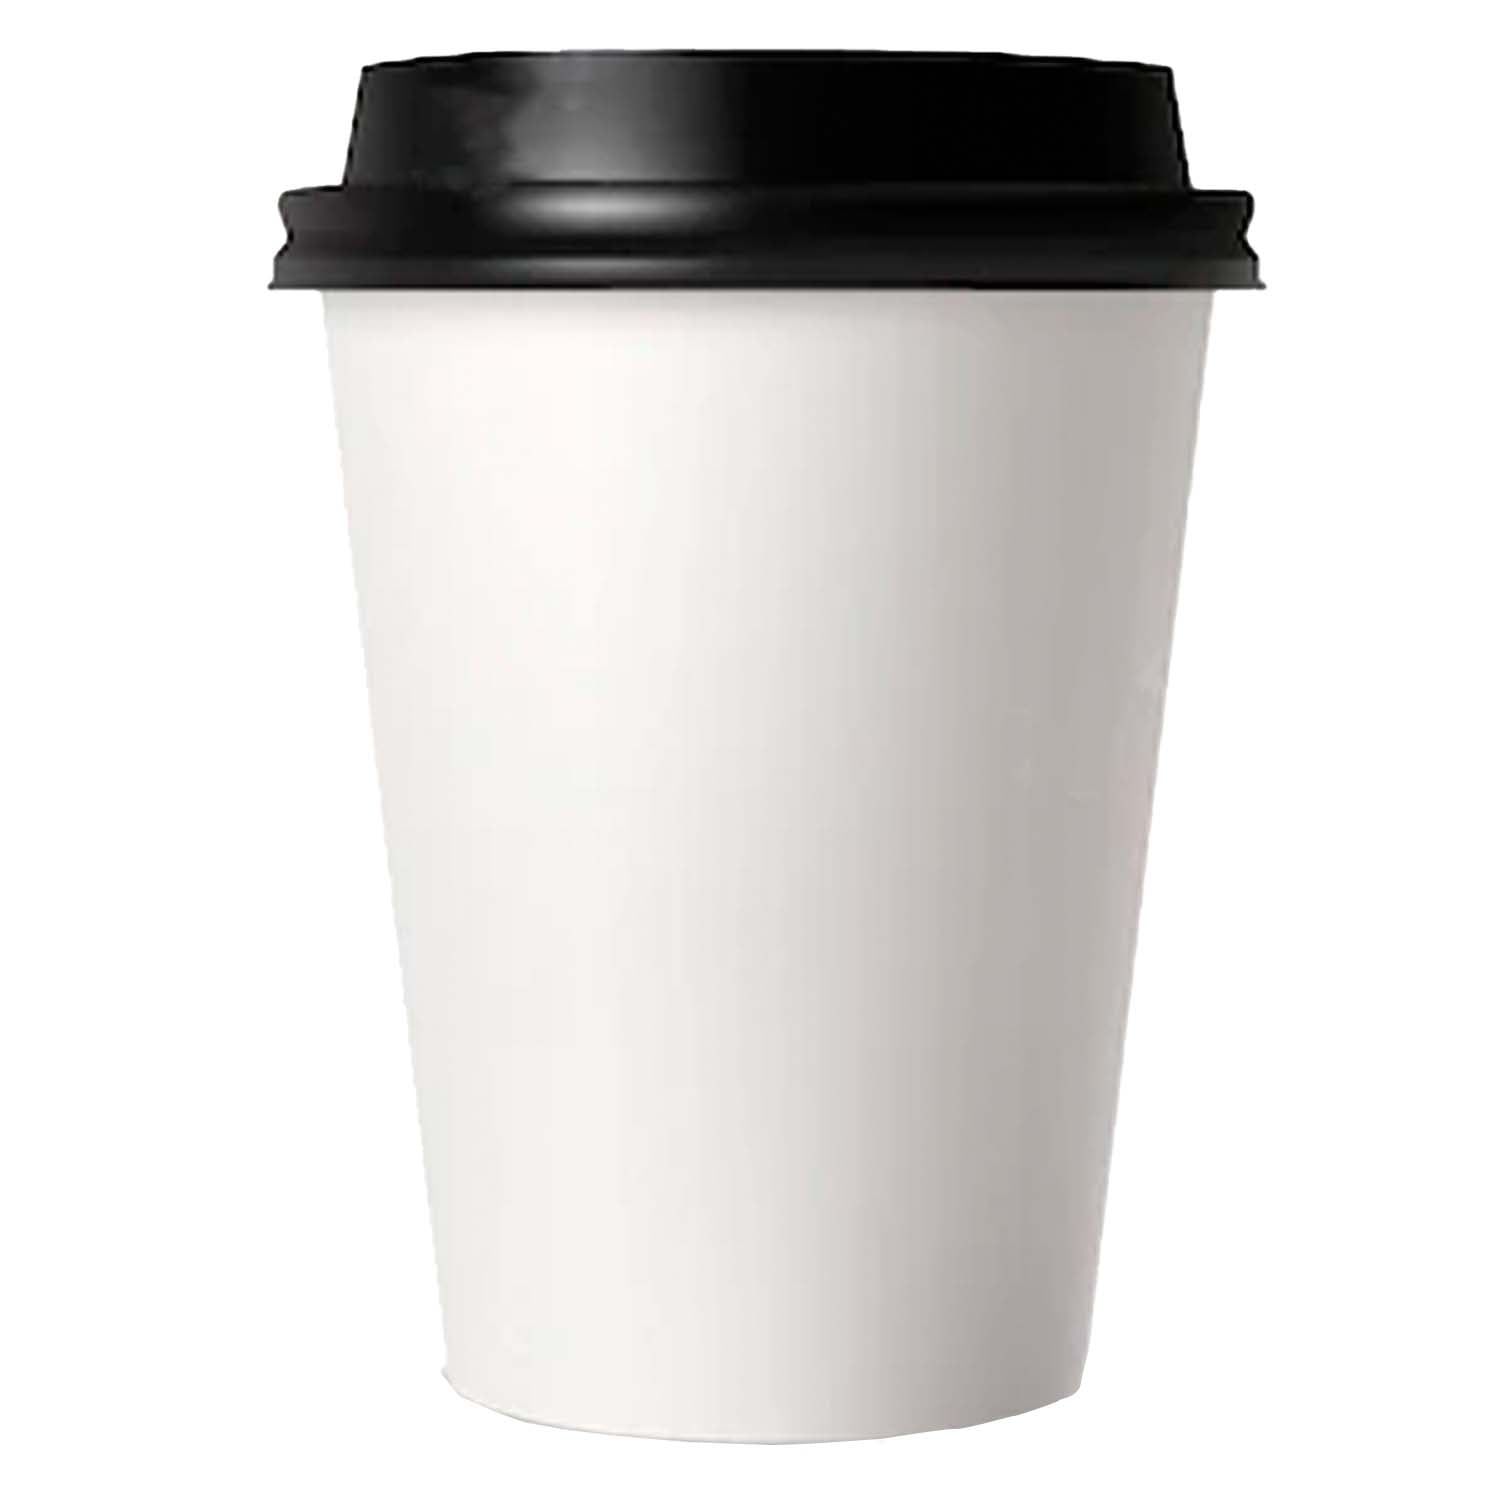 12oz Disposable White Paper Hot Cold Cups with Black Dome Lids